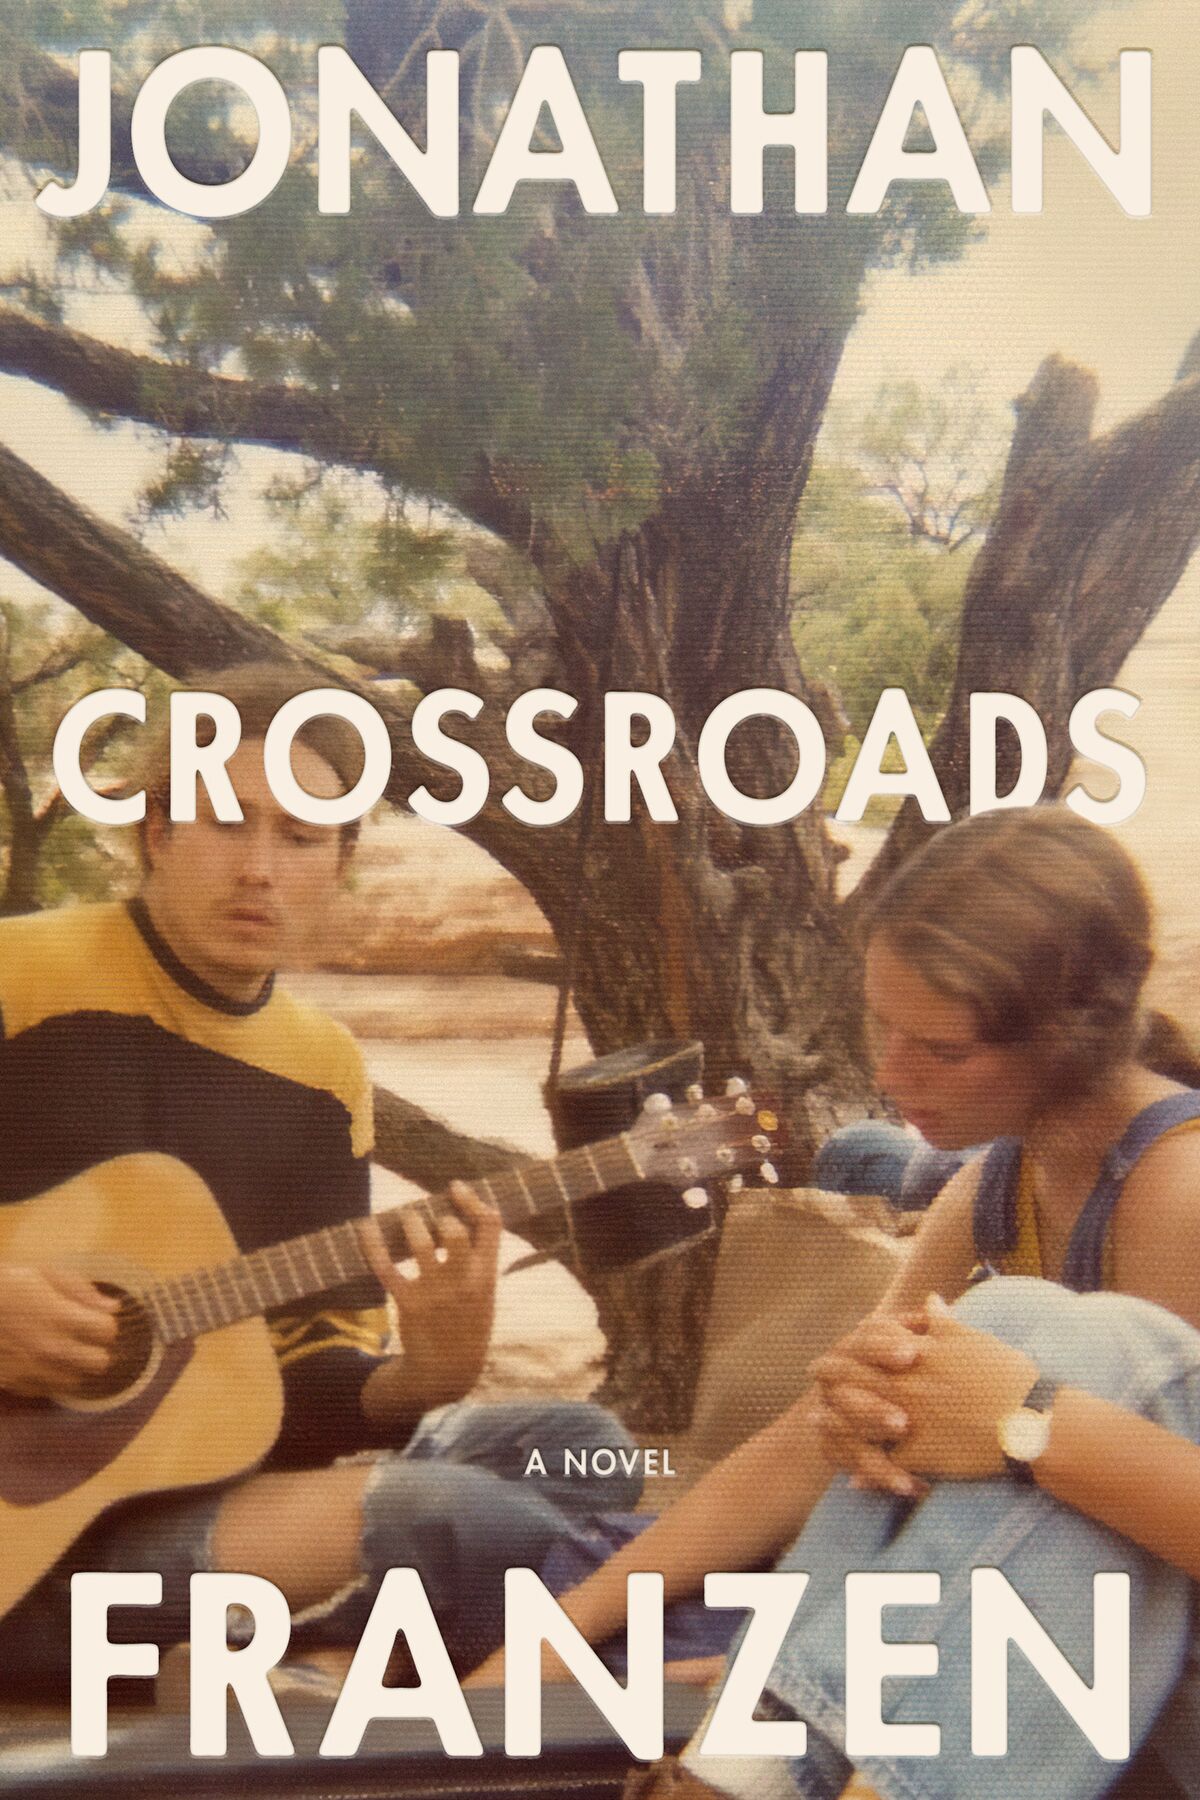 The cover of "Crossroads" by Jonathan Franzen